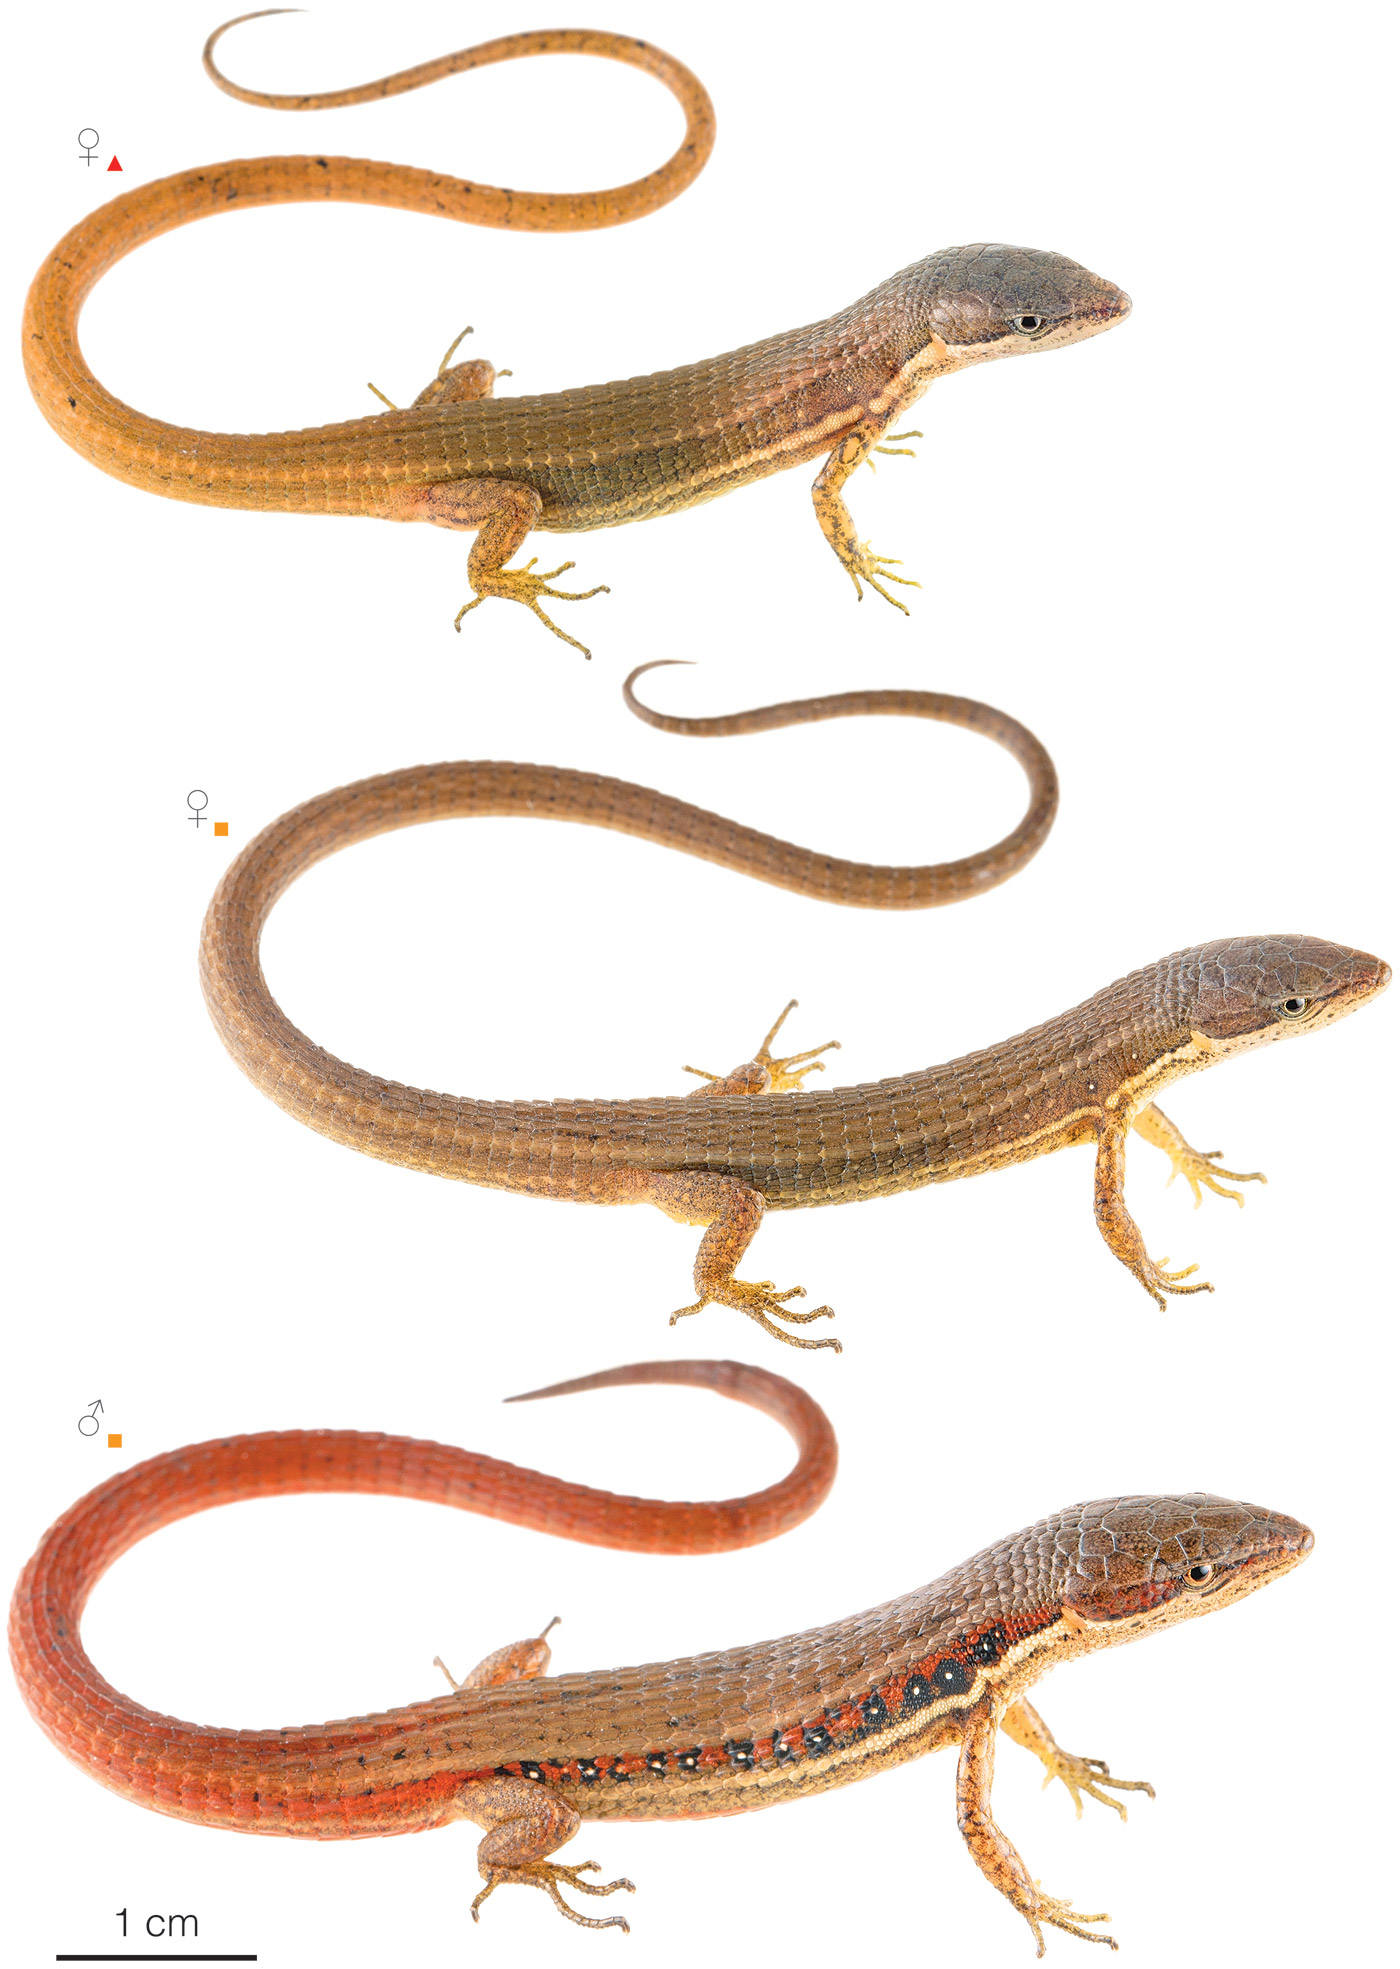 Figure showing variation among individuals of Cercosaura argulus